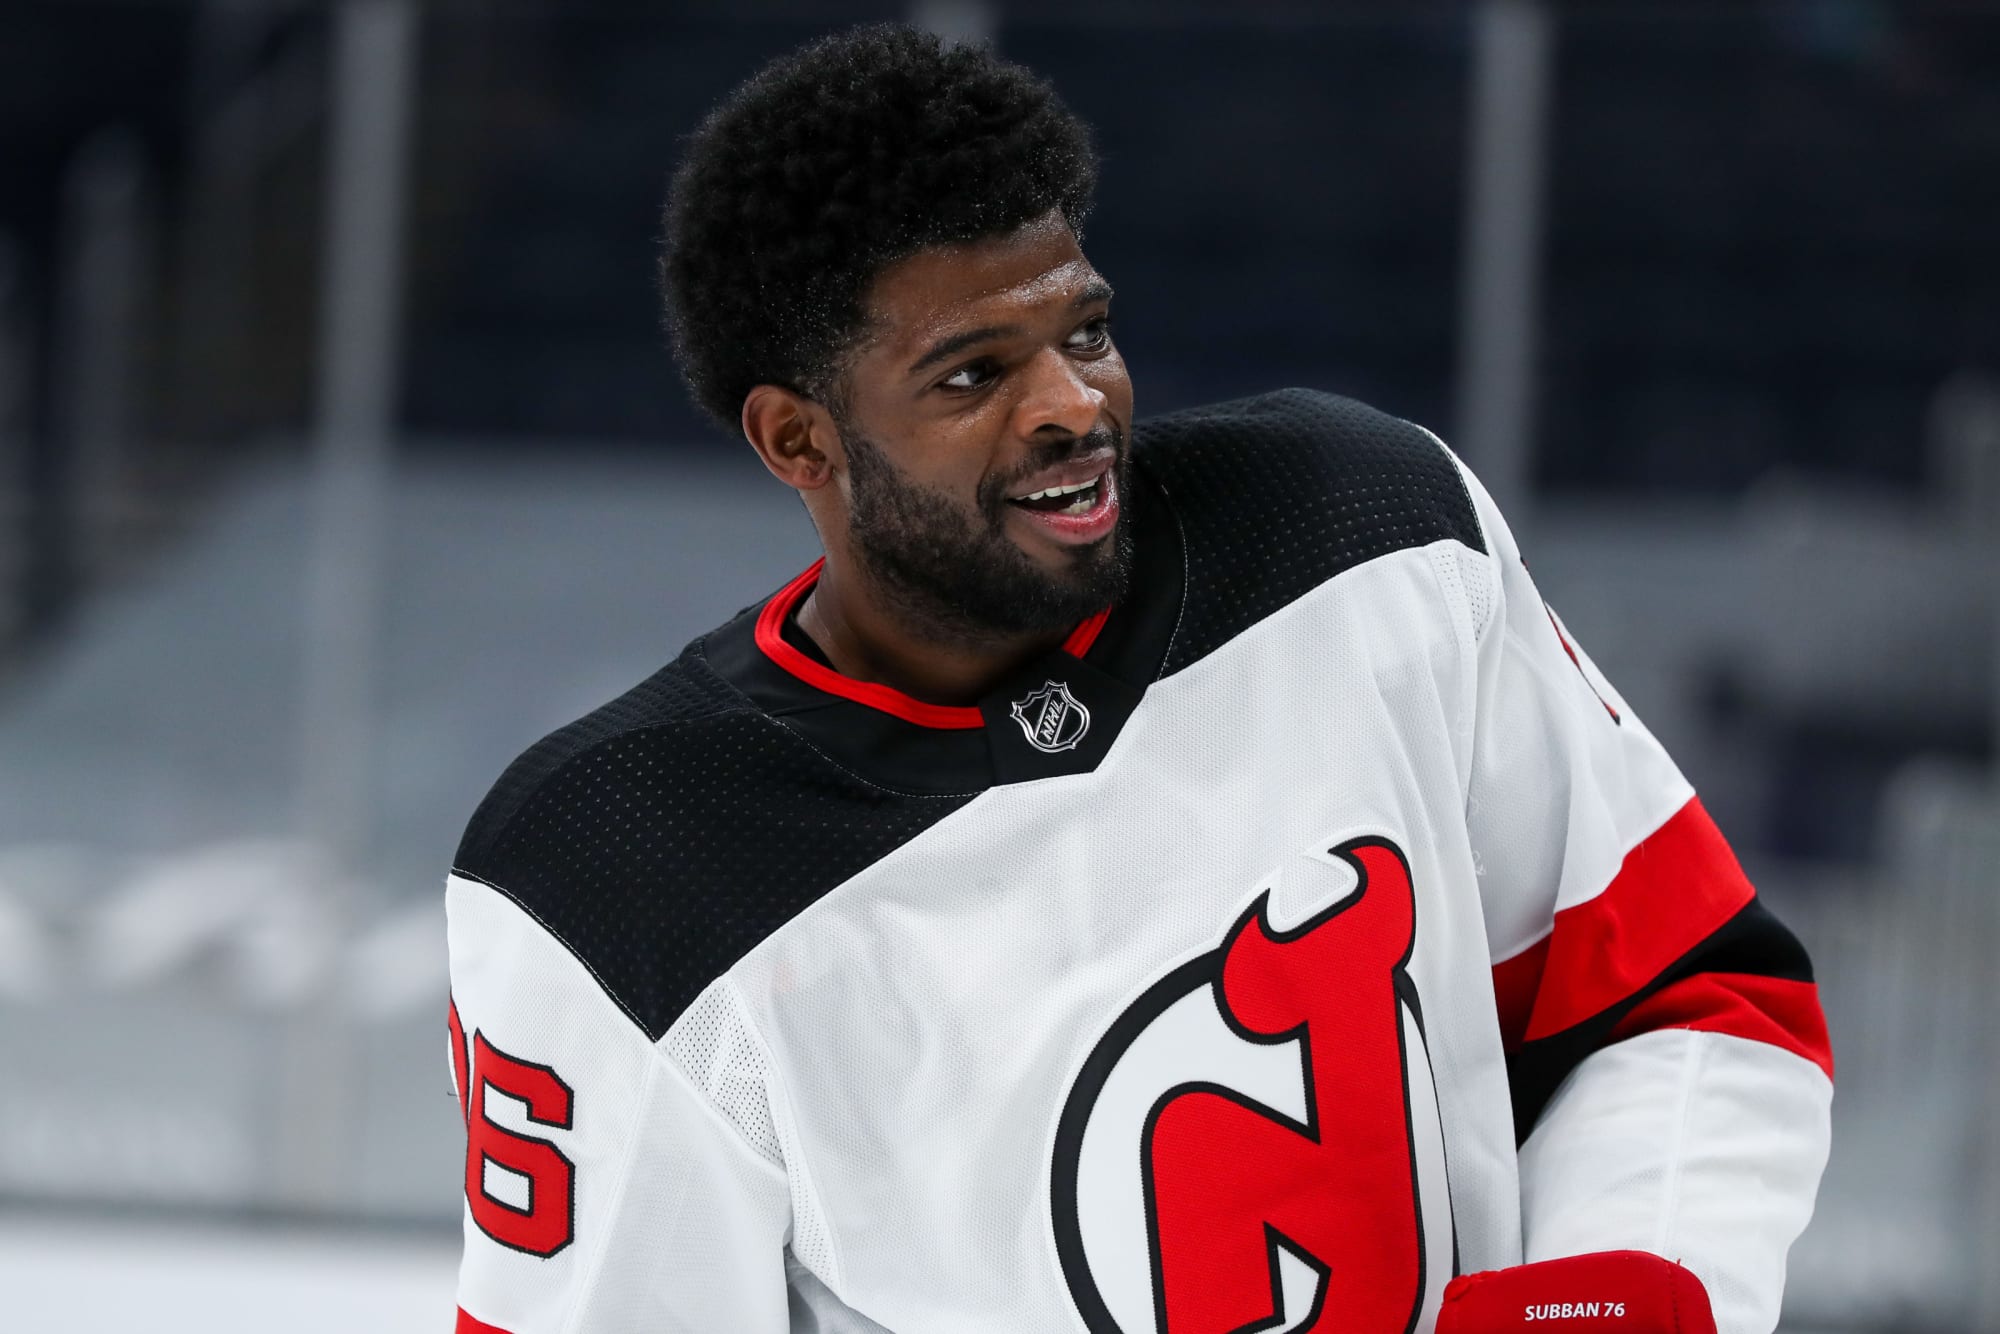 P.K. Subban receives a Ric Flair style robe in his official Devils